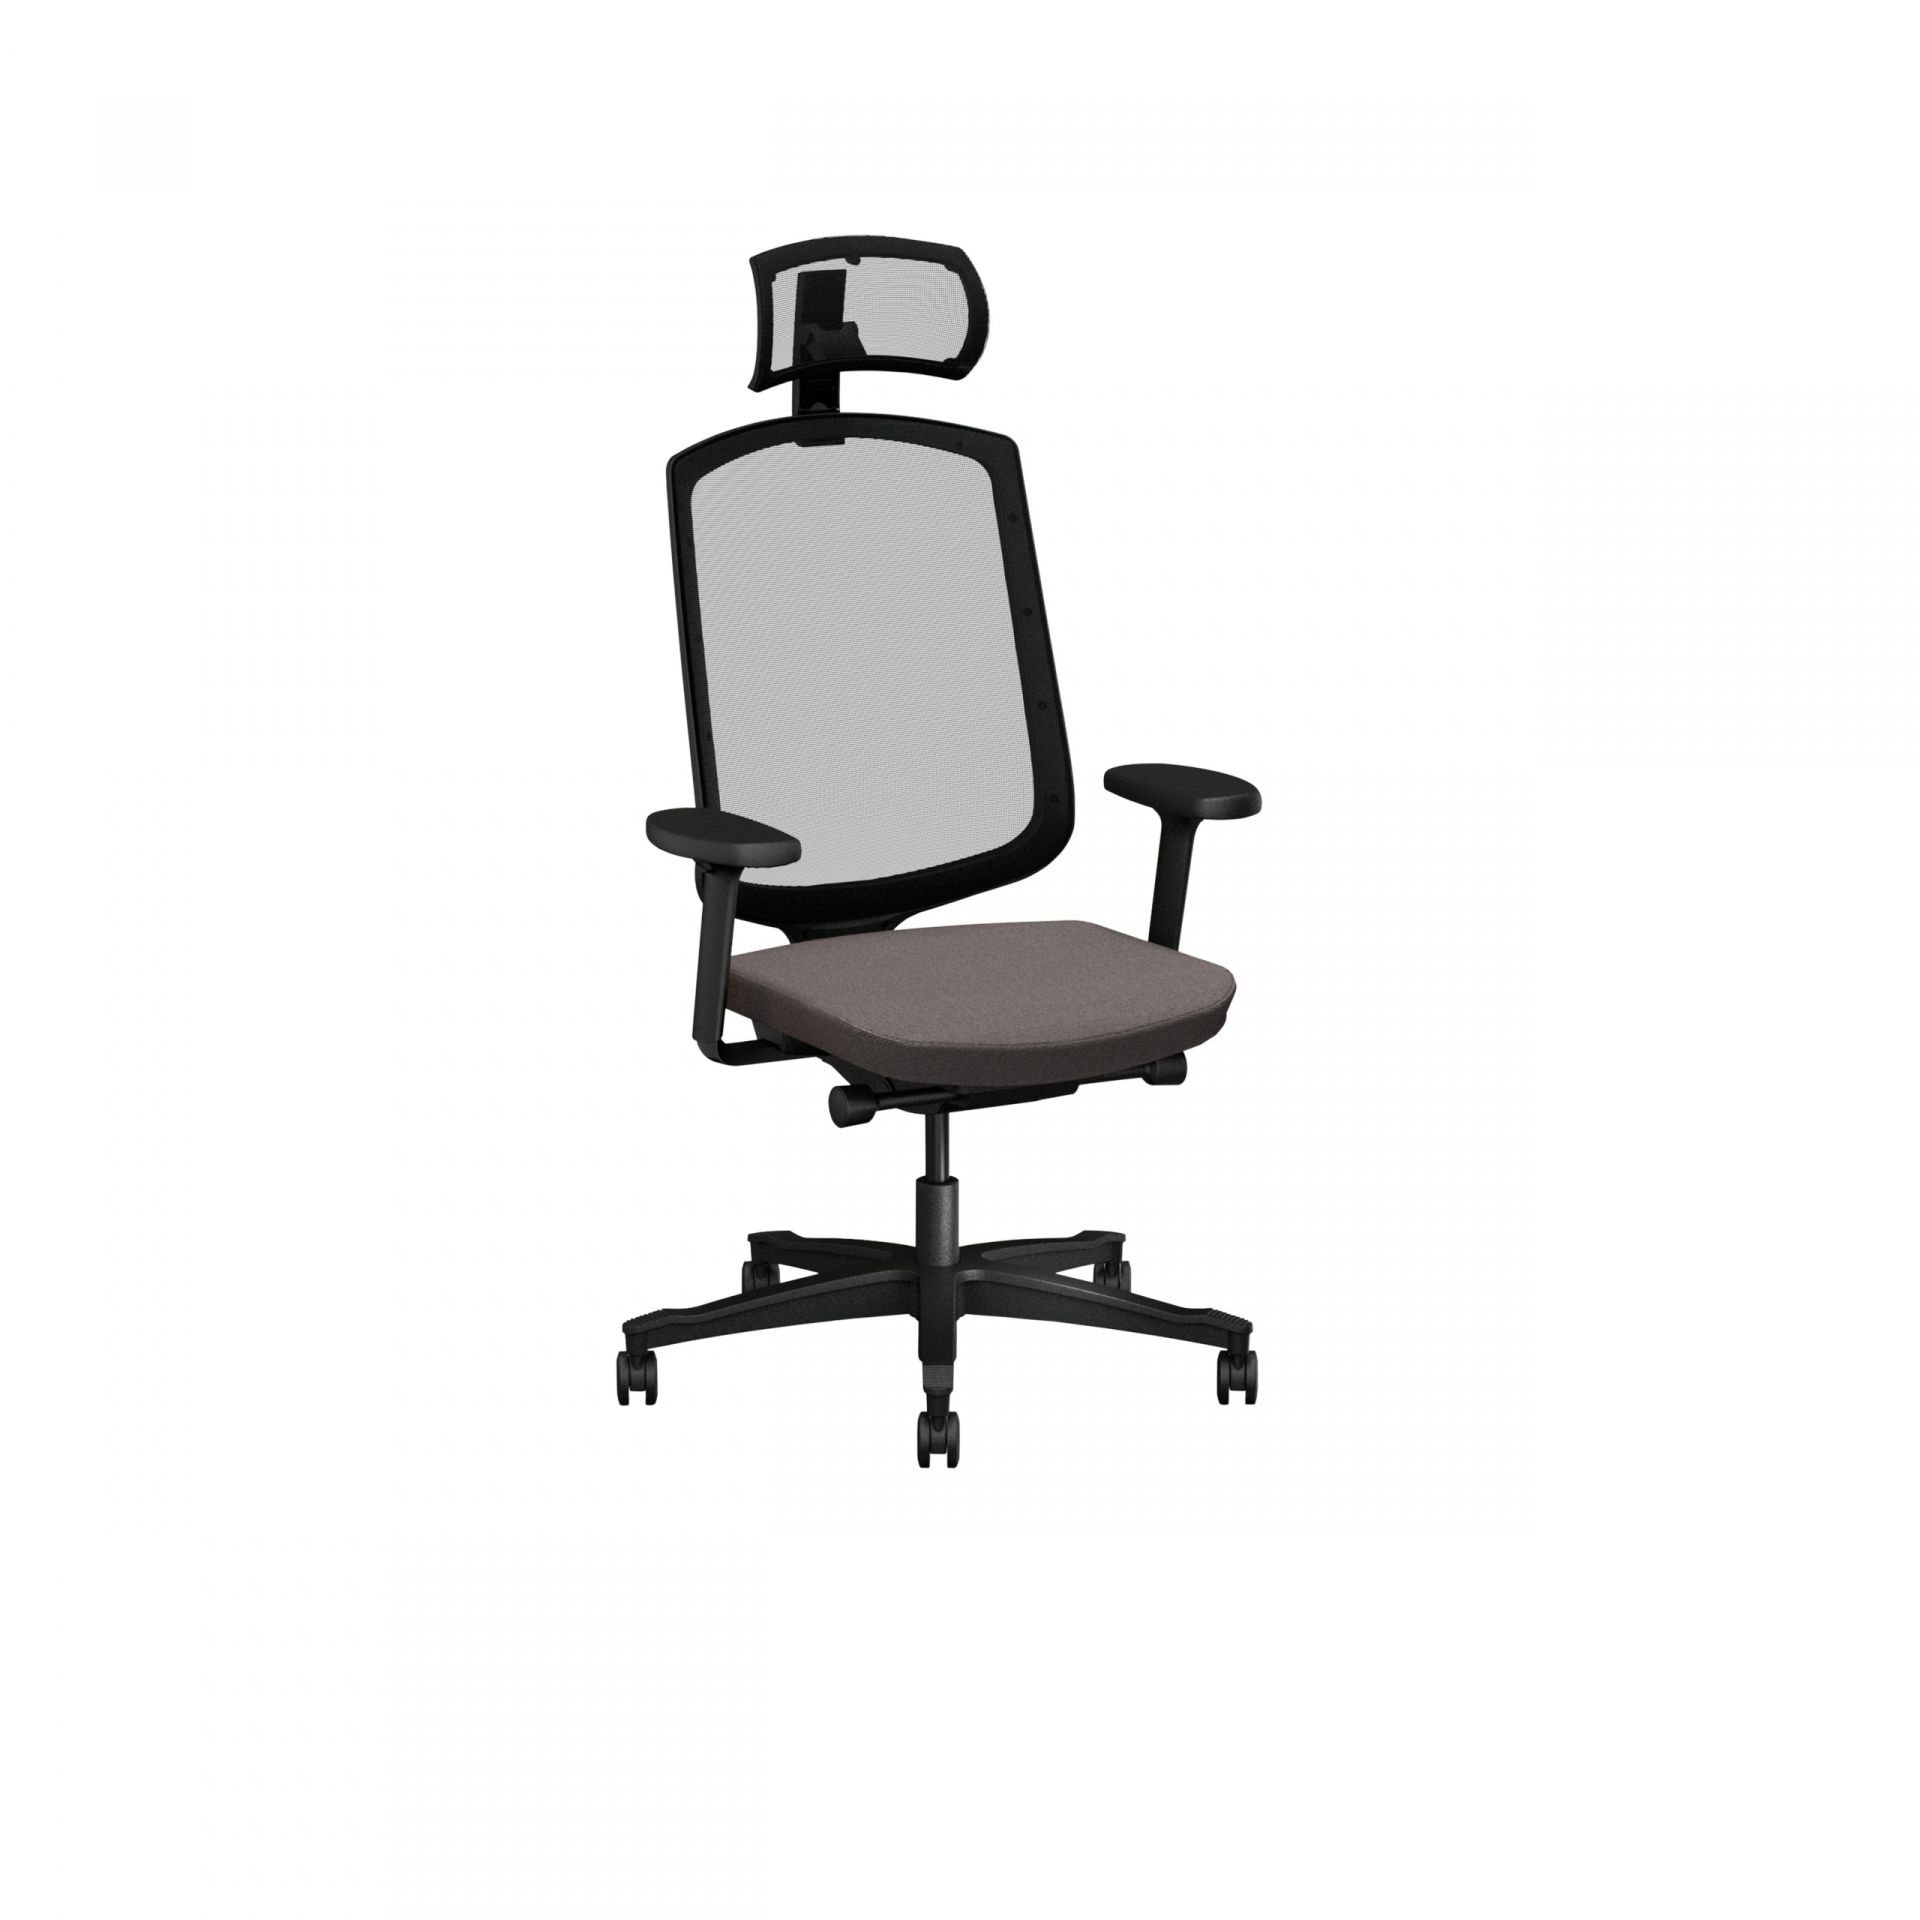 One Office chair with easy adjustments